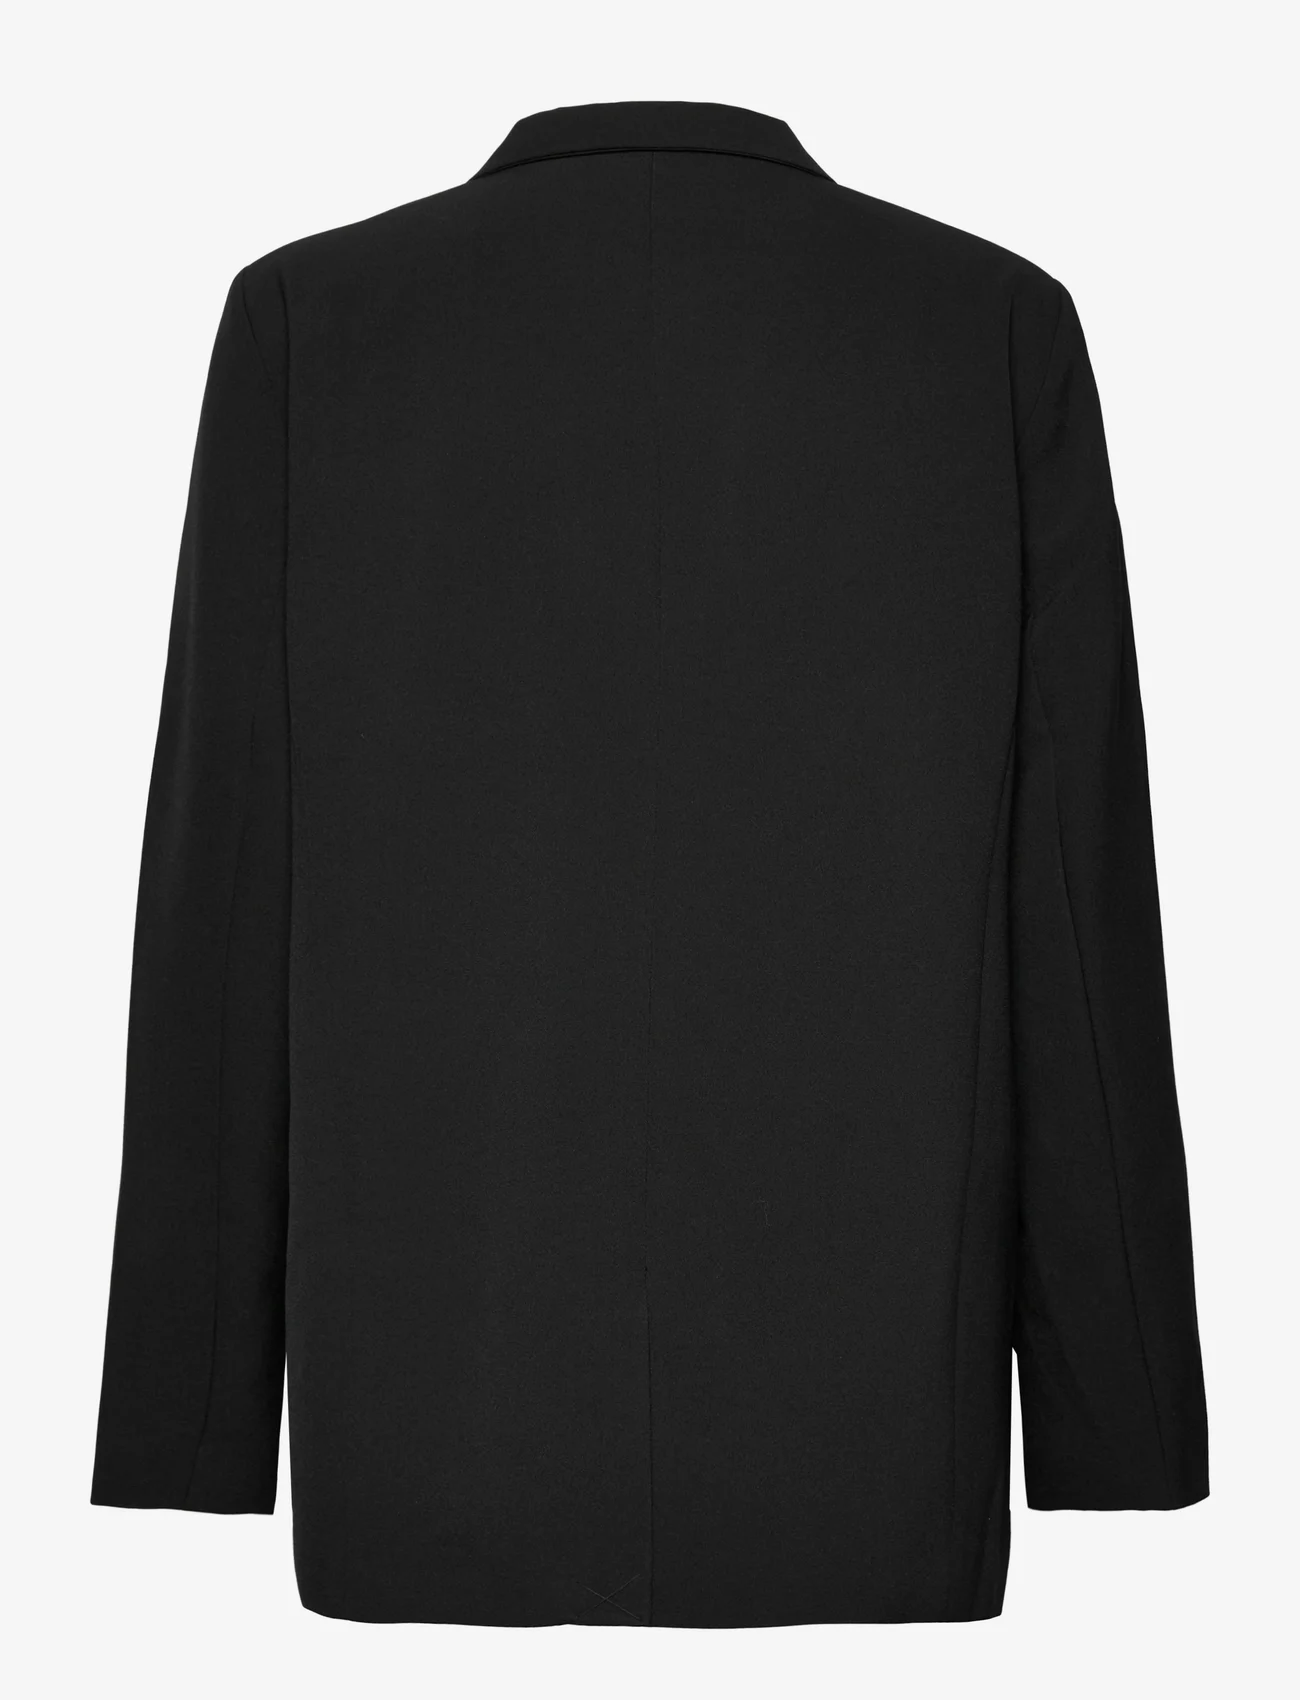 My Essential Wardrobe - 27 THE TAILORED BLAZER - party wear at outlet prices - black - 1